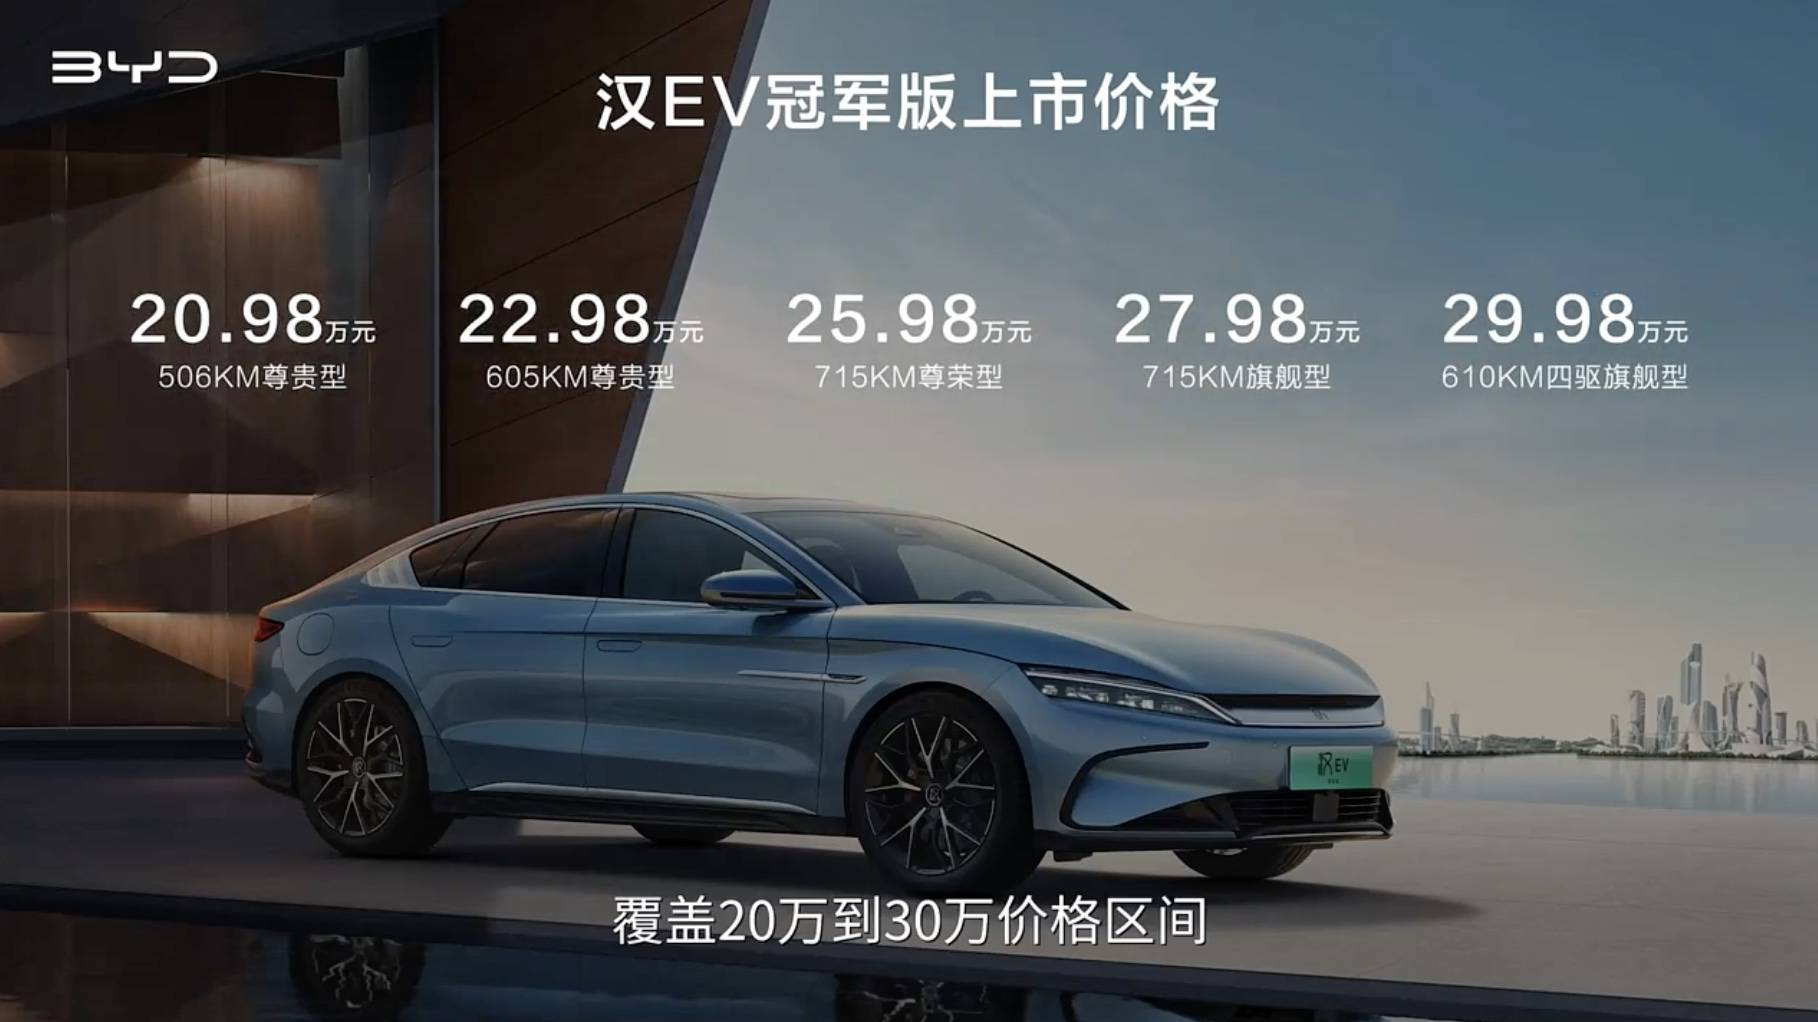 BYD Han EV Champion officially goes on sale with prices ranging from 209,800 to 299,800 yuan.